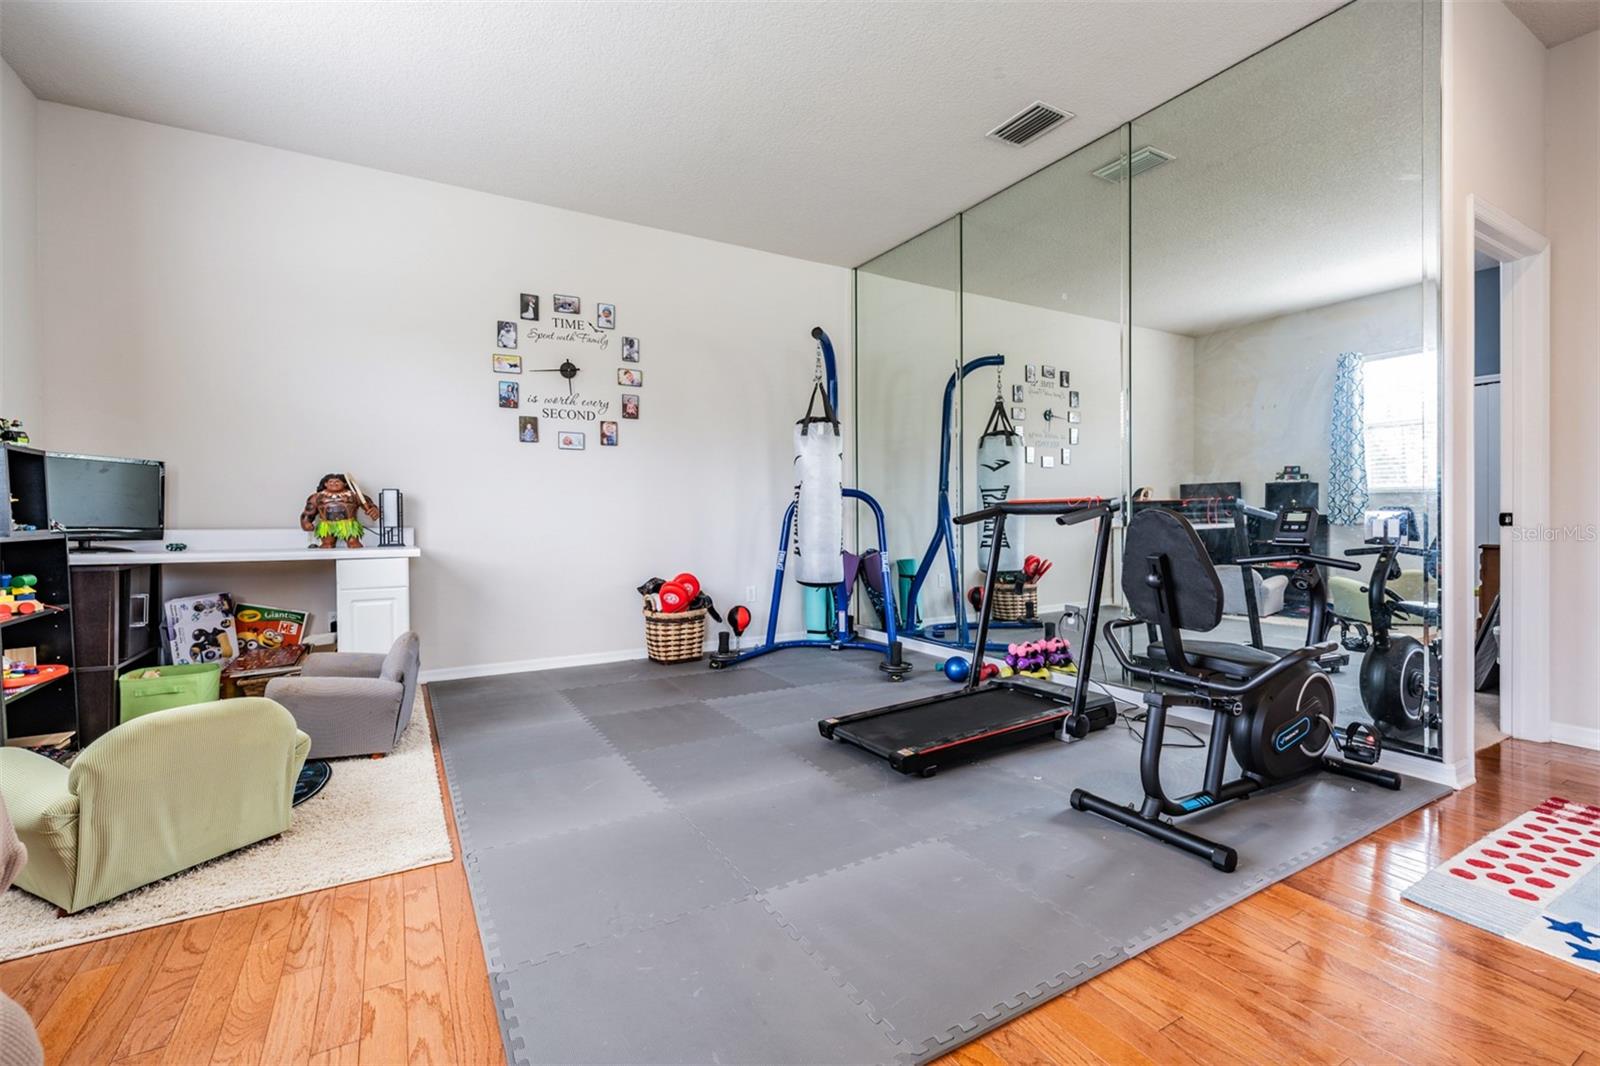 used for fitness and playroom (previous ballet studio)